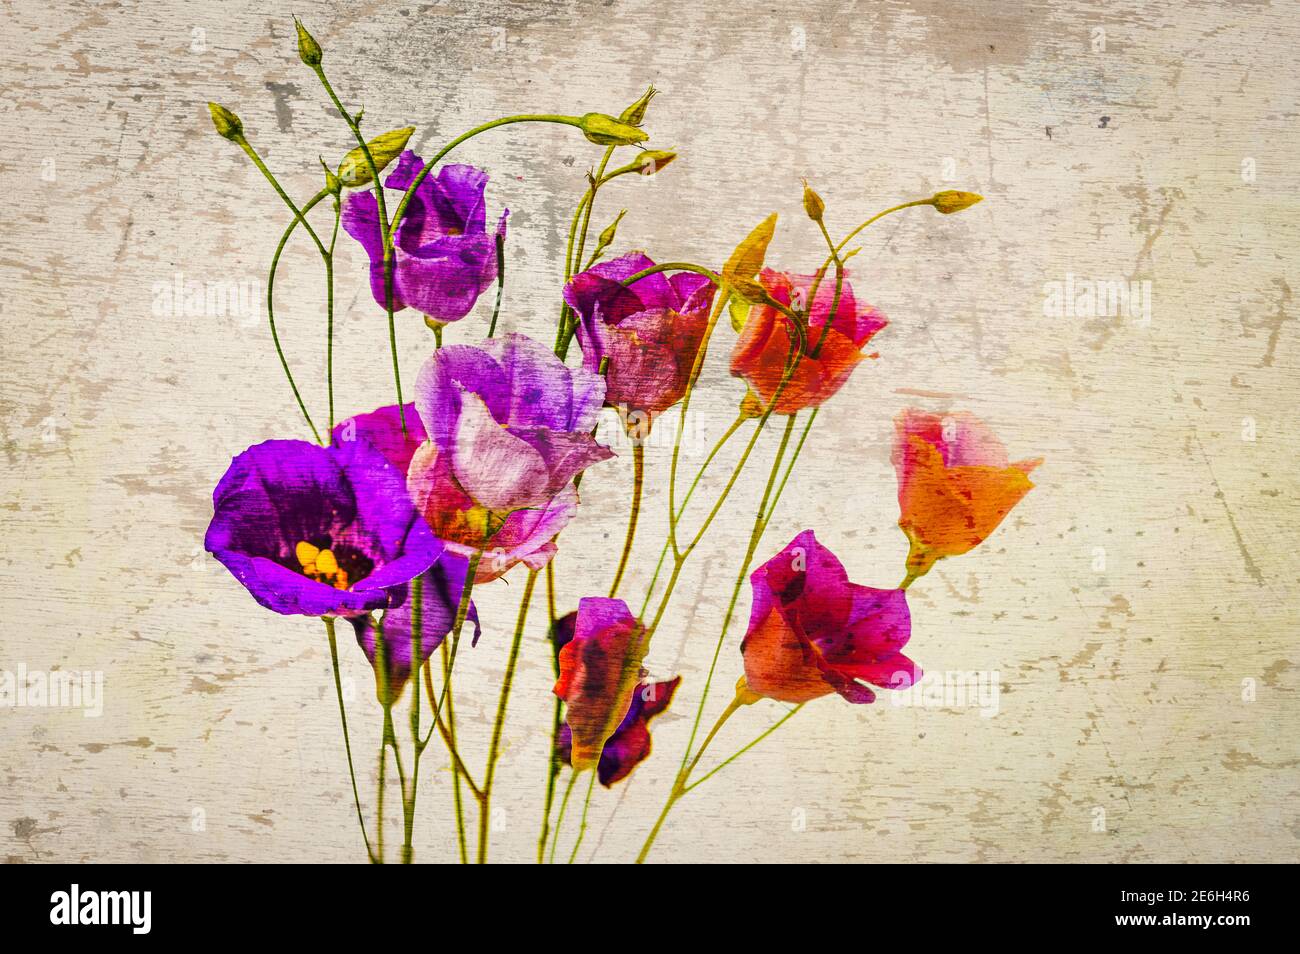 Lisianthus flowers on a textured background Stock Photo